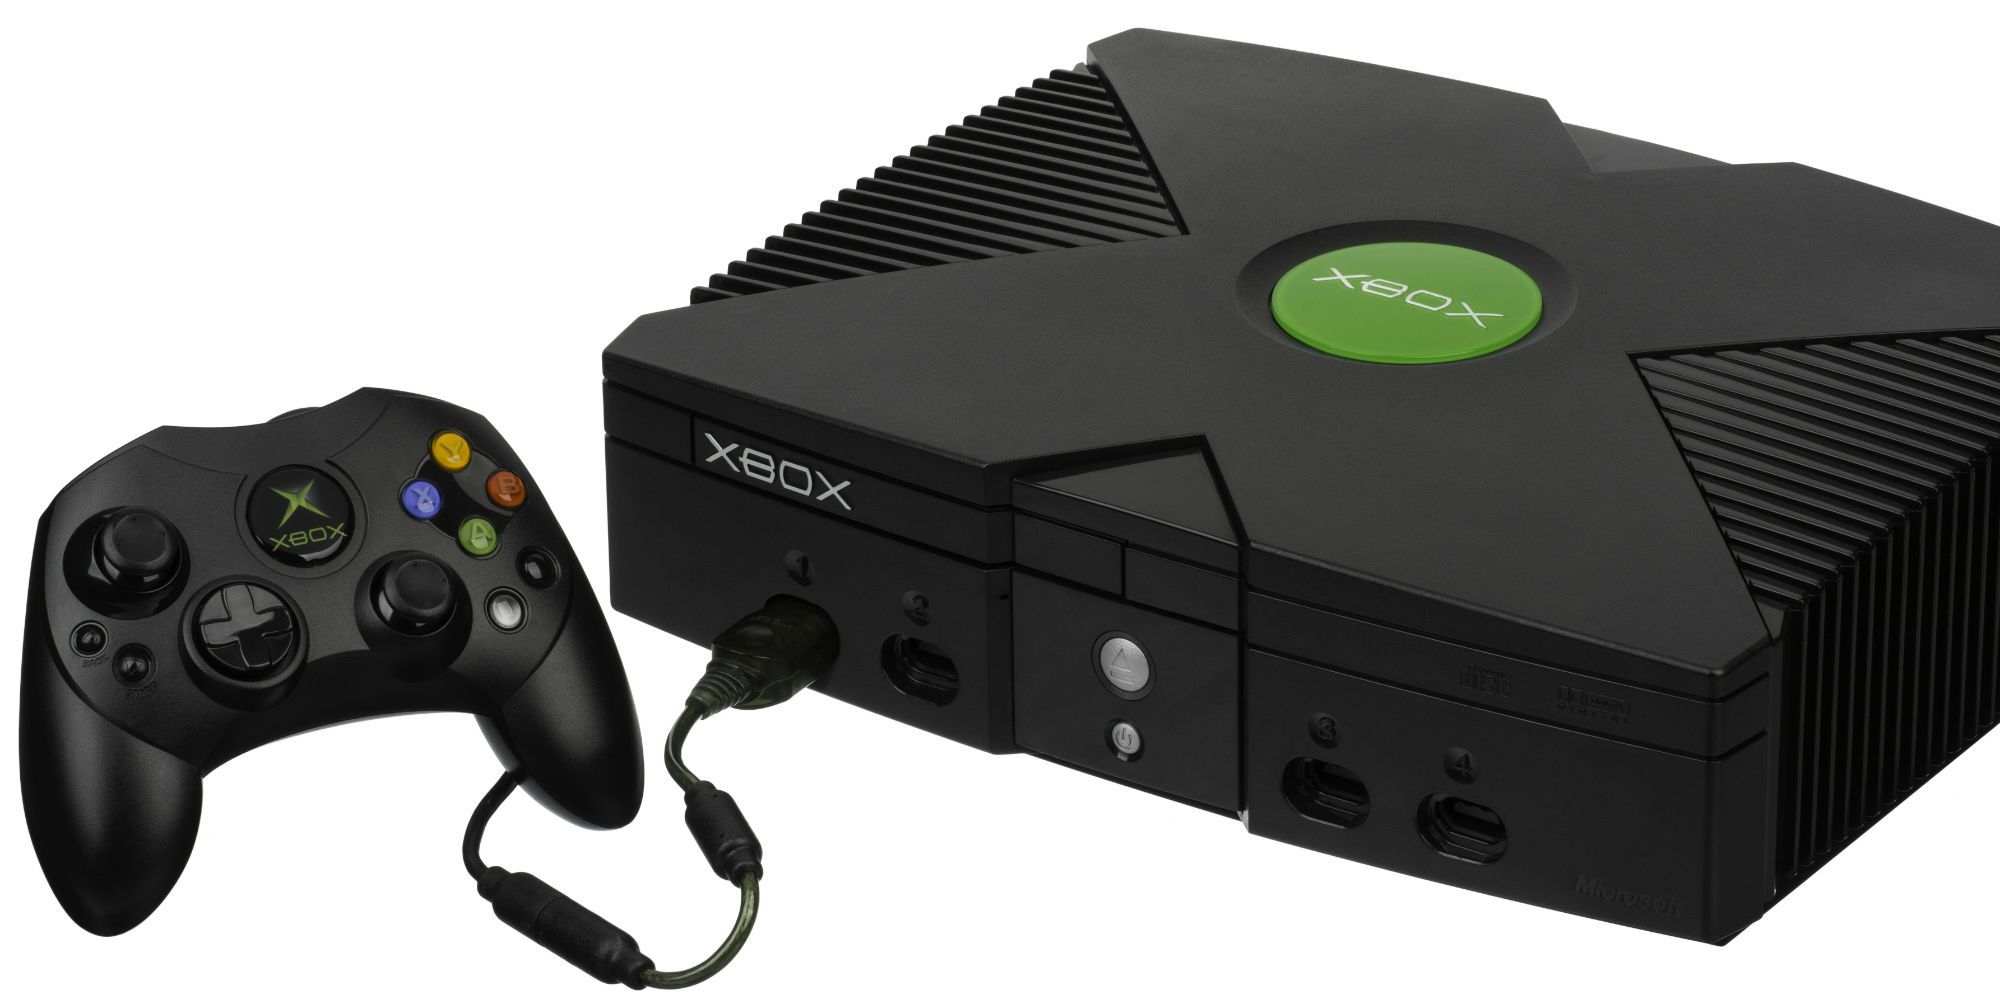 The Rarest Original Xbox Games (&amp; What They Sell For)